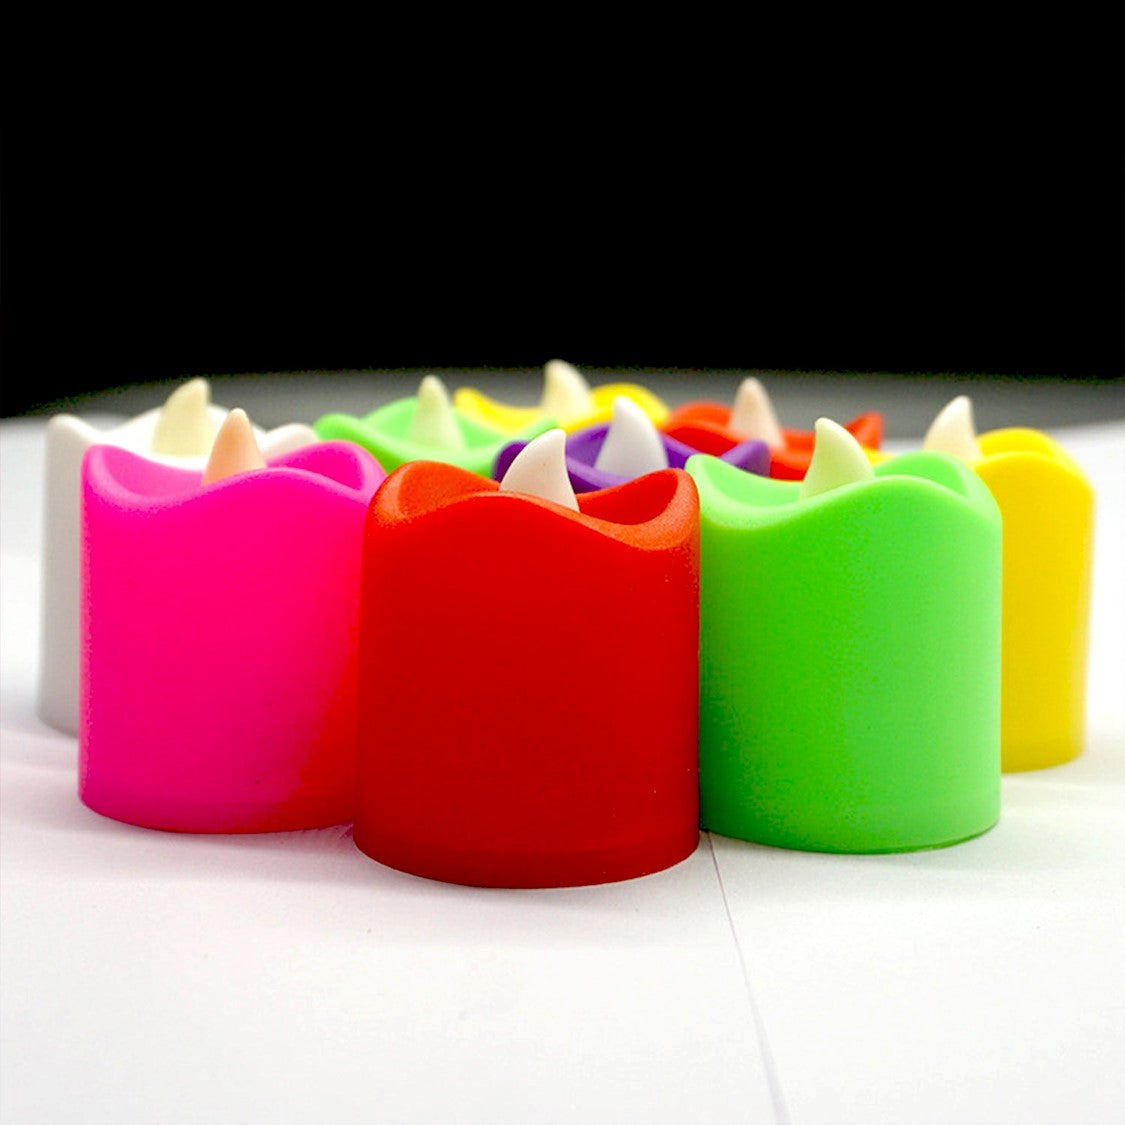 HK Creation Flameless and Smokeless Decorative Multicolor Tealight Led Candles Perfect for Gifting, House, Light for Balcony, Room, Birthday, Festival Decoration (Set of 6)